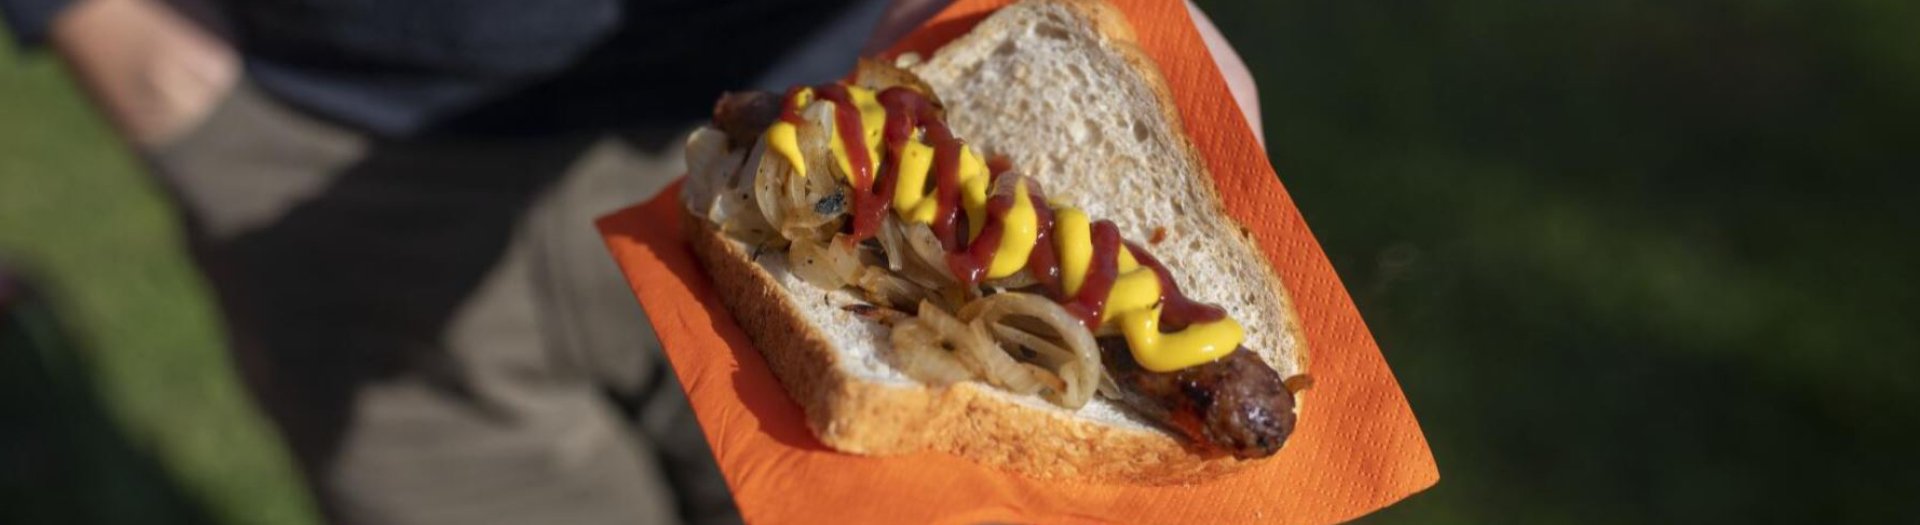 A sausage on a piece of white bread, covered in mustard, tomato sauce and fried onions. This sausage in bread is on an orange paper napkin, being held in someone's hand.